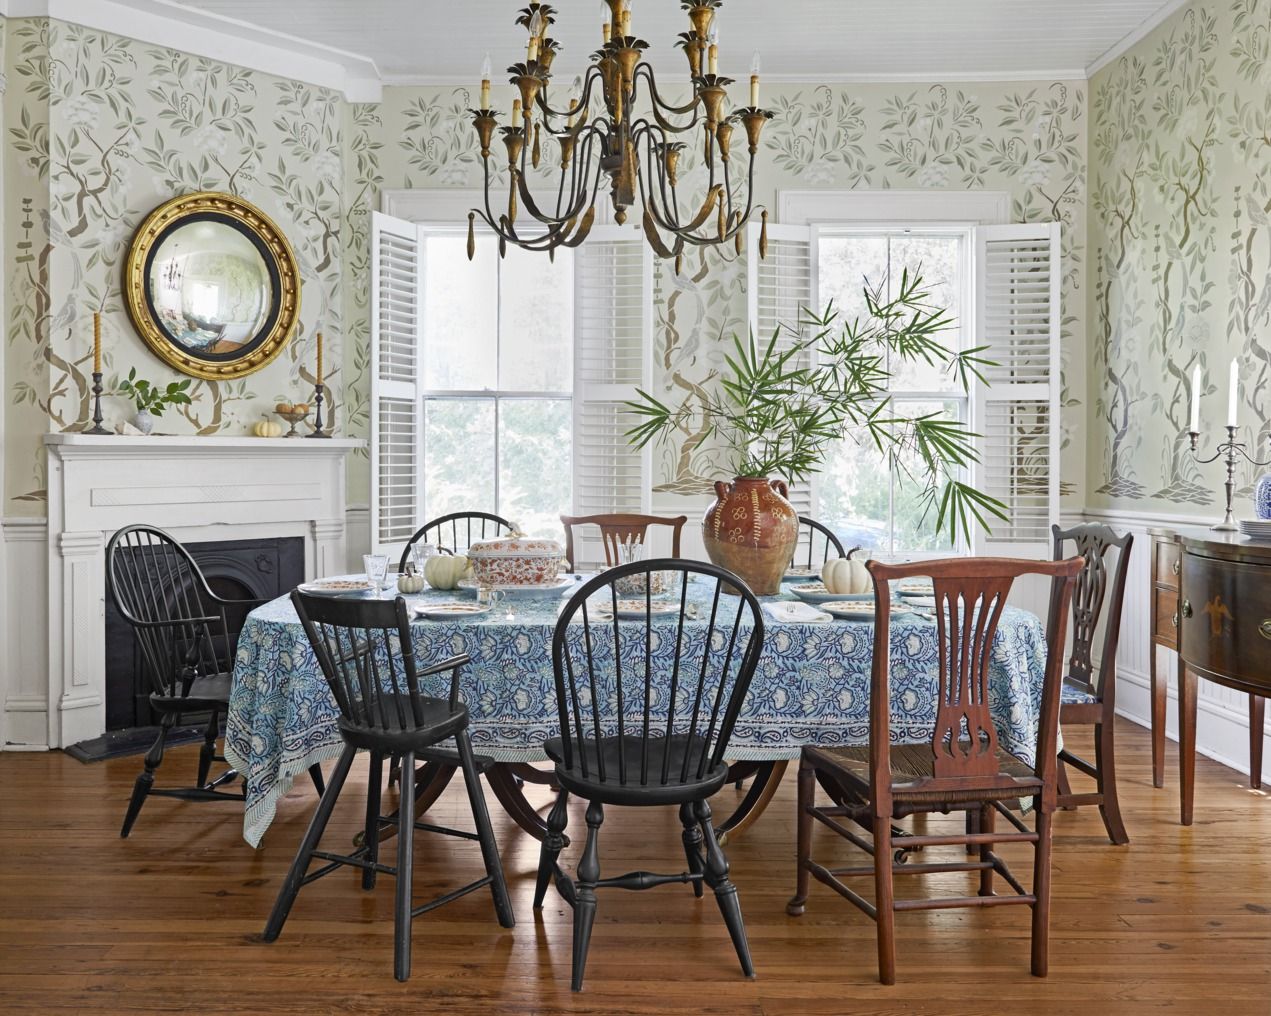 50 Dining Room Decor Ideas For a Stylish Entertaining Space